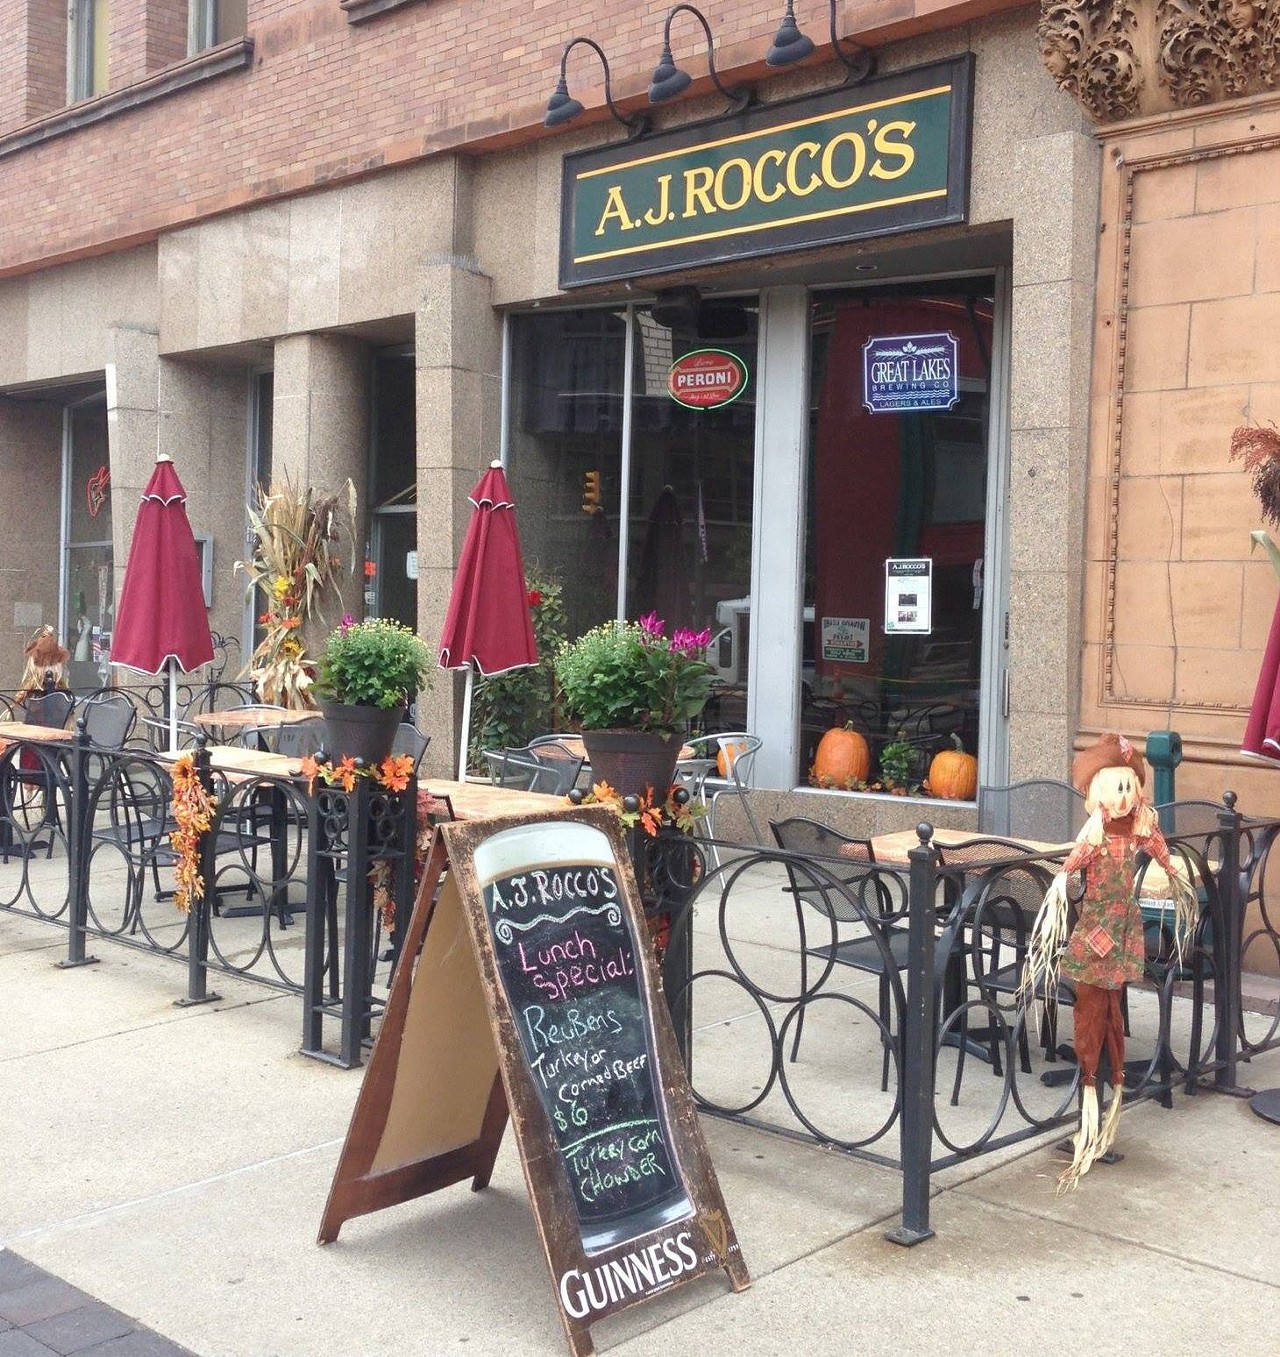 After an 18-year run, A. Brendan Walton shuttered his popular Gateway District spot A.J. Rocco’s. When it reawakens in the coming months, it will do so next door in the former Huron Point Tavern/Alesci's building, which has undergone a major renovation.